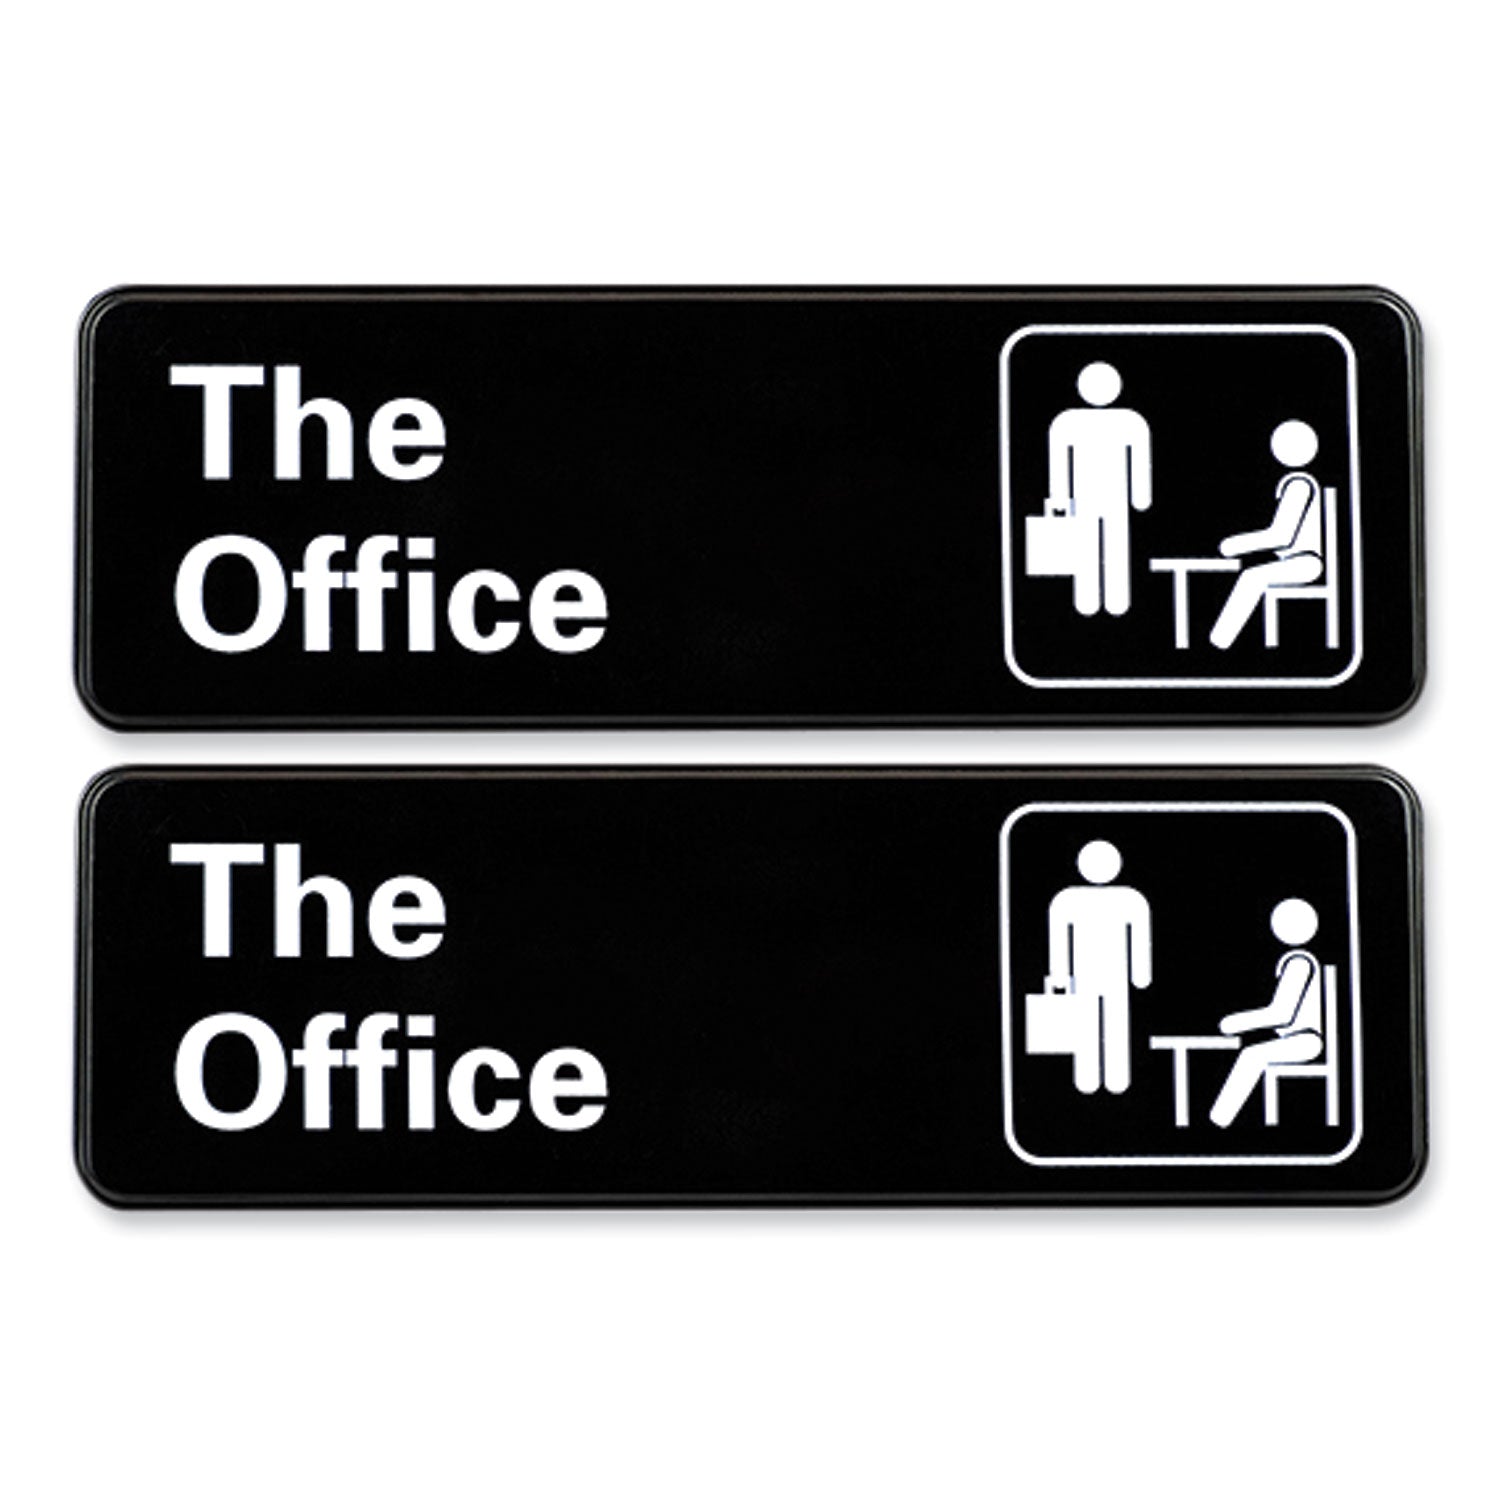 the-office-indoor-outdoor-wall-sign-9-x-3-black-face-white-graphics-2-pack_exohd0064s - 1